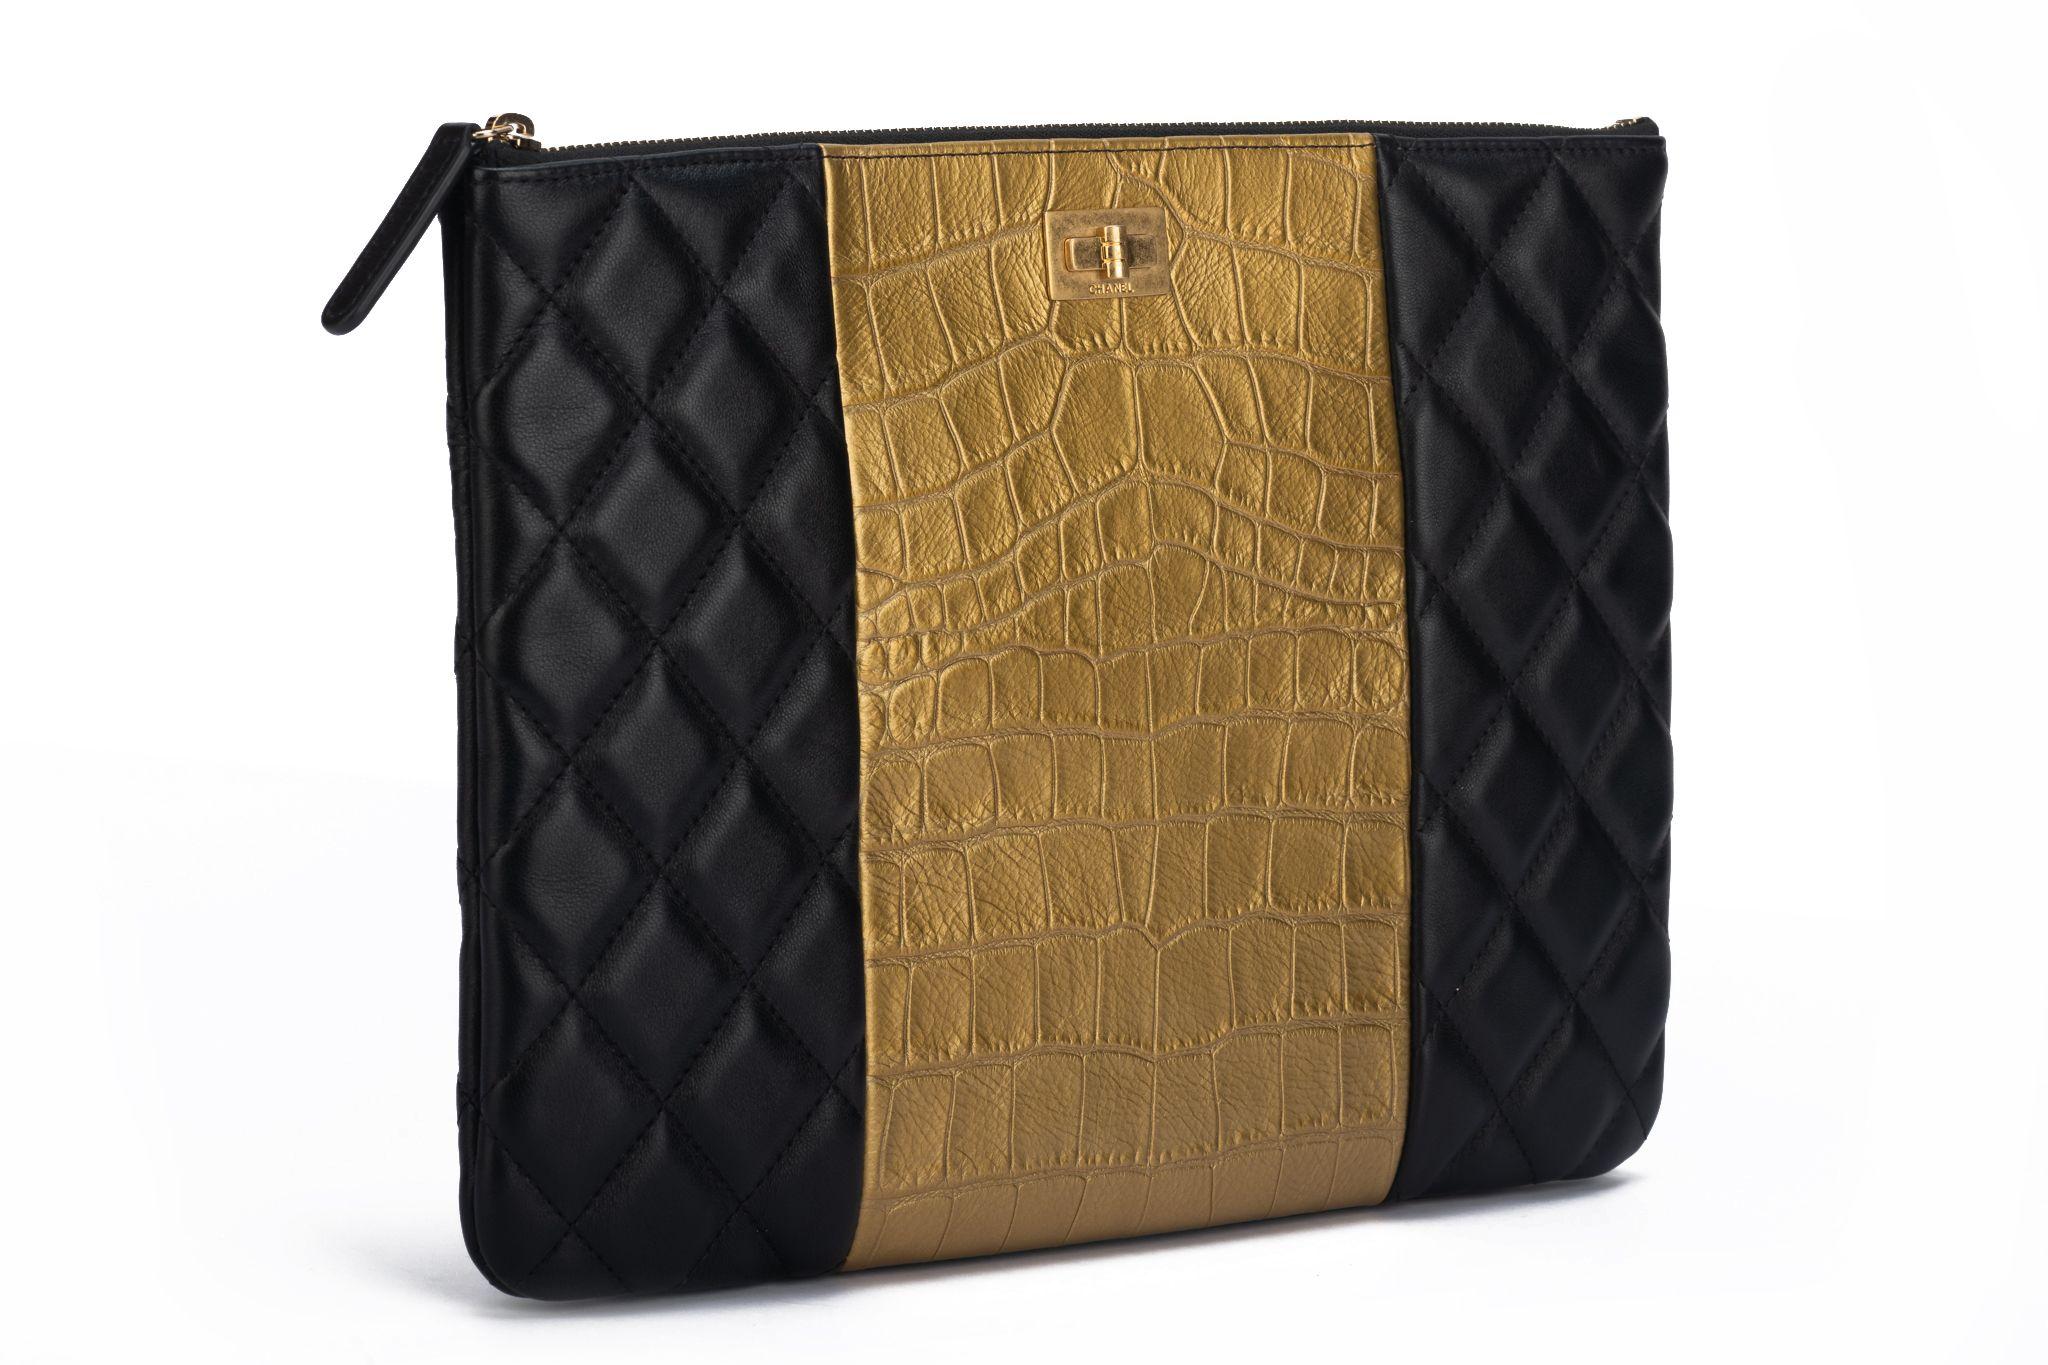 Chanel new black quilted and gold croc embossed leather clutch. Collection 28. Comes with hologram, di card, dust cover and box.
